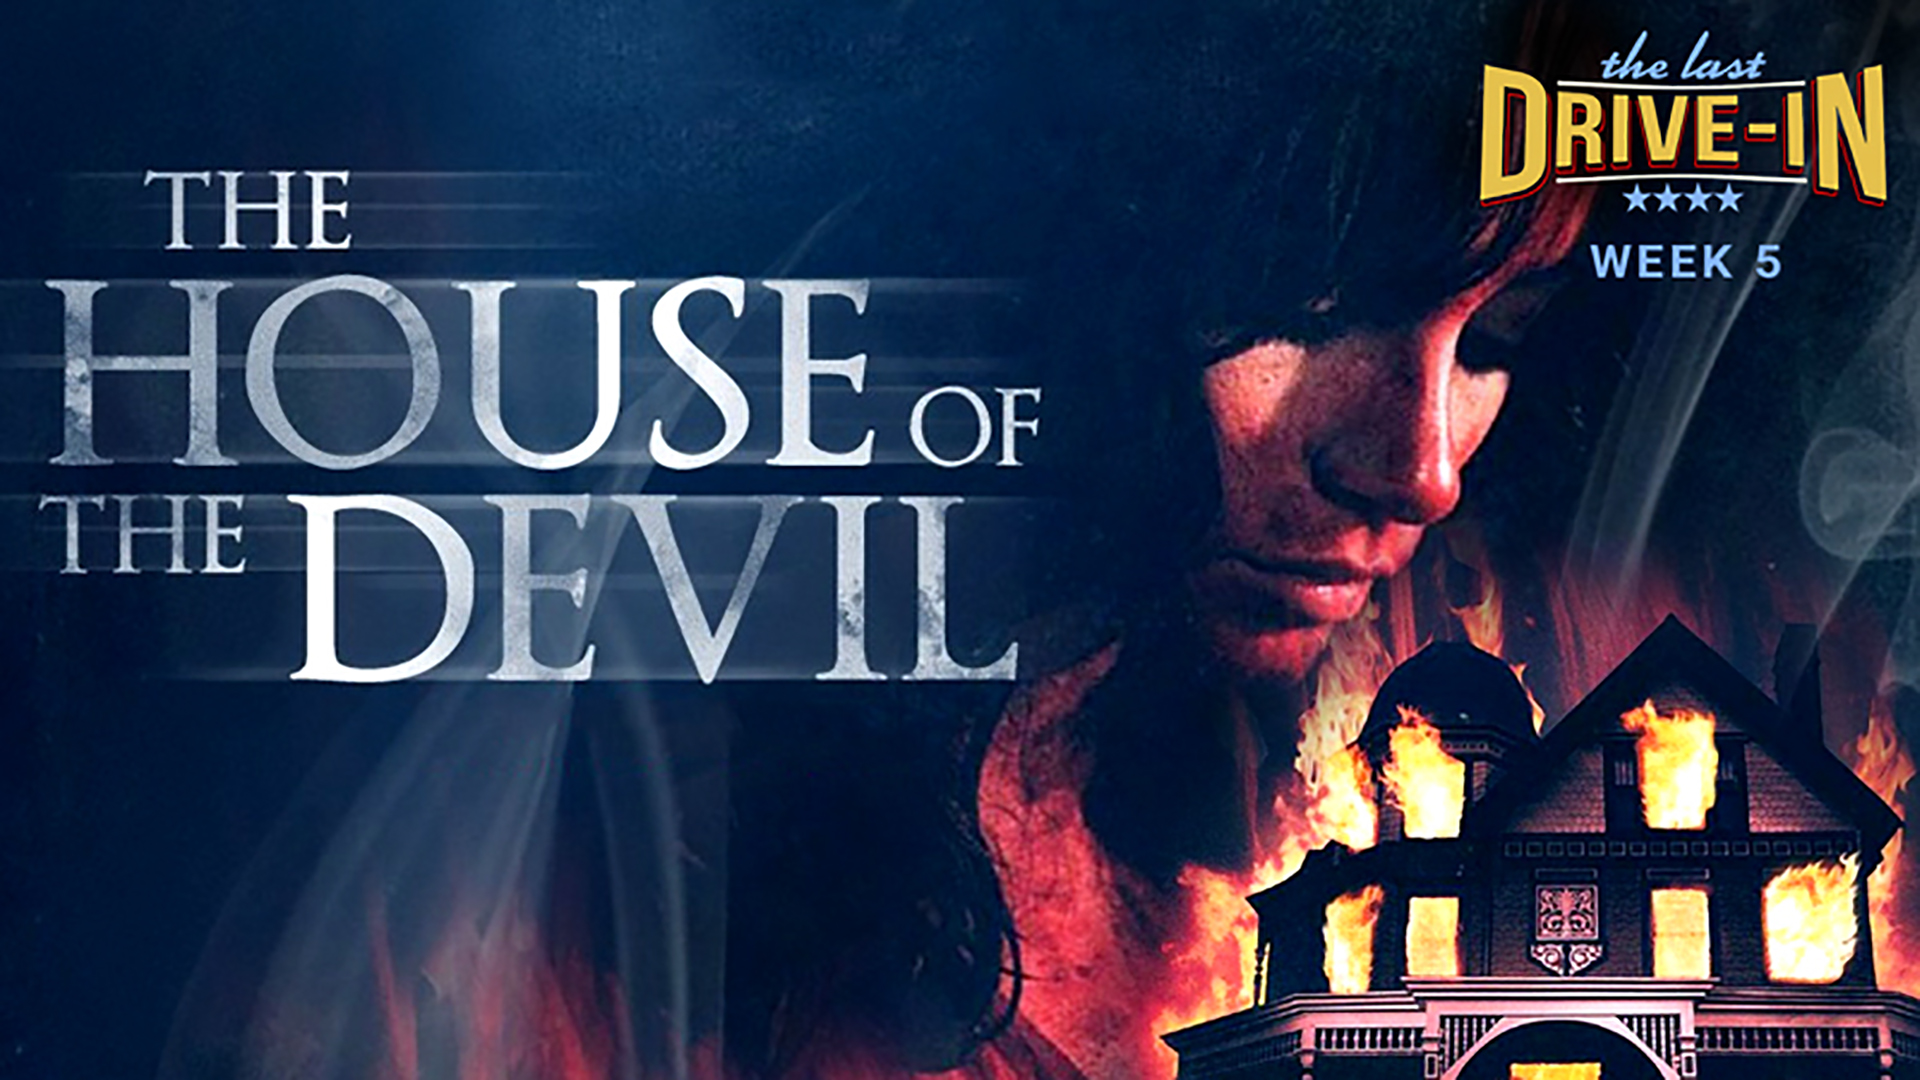 Week 5: The House of the Devil, A man lures a babysitter to a house with an unusually large sum of money., TV-MA, Season 1028421, Episode 10